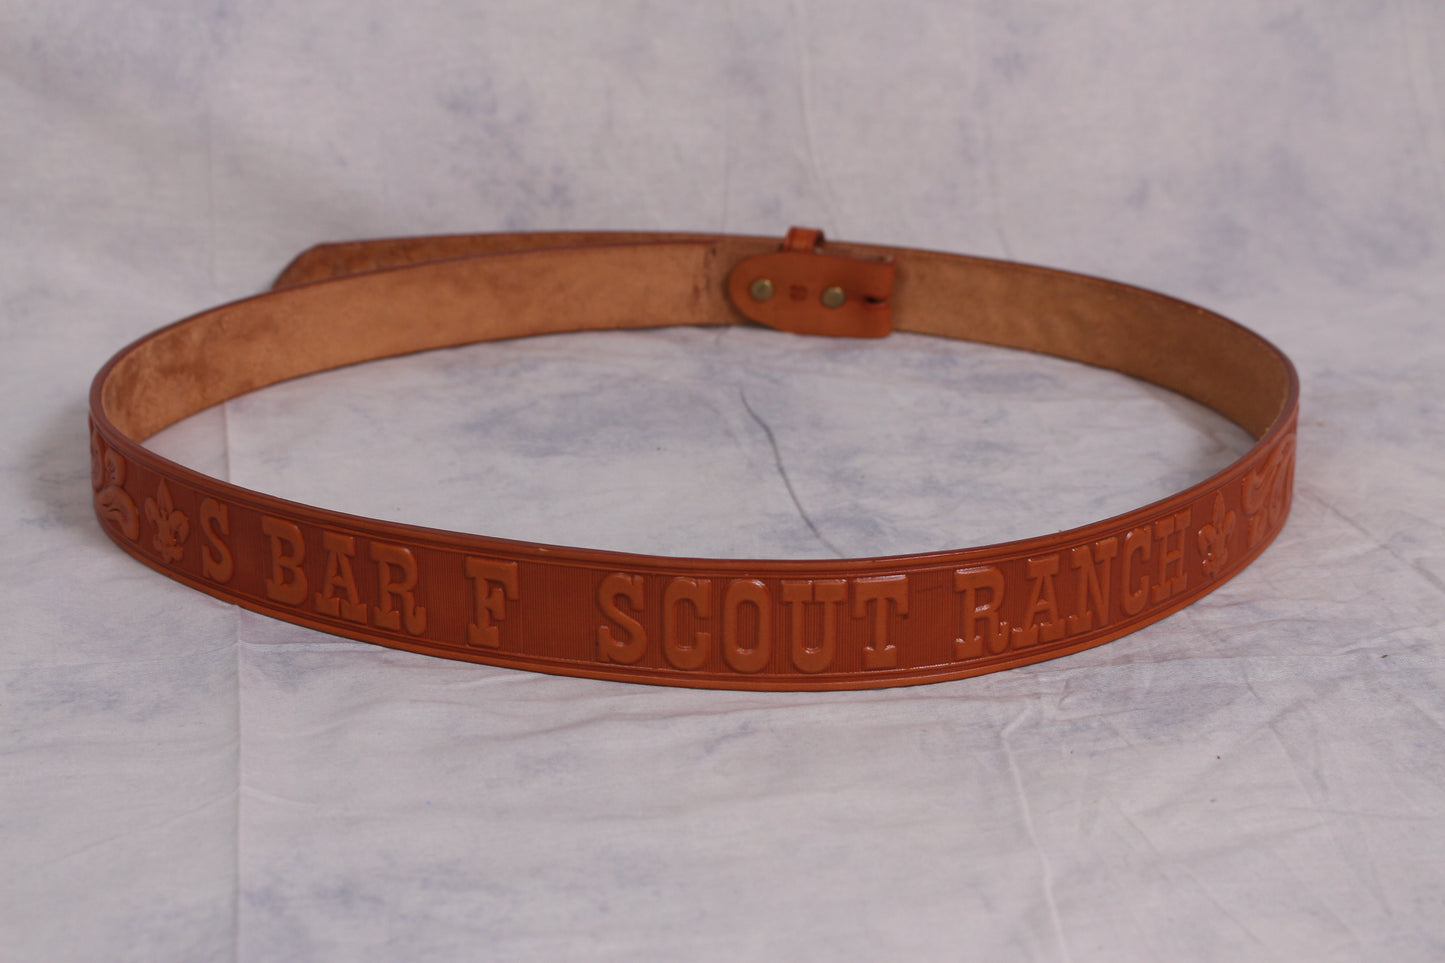 Belt - Leather S bar F Scout Ranch